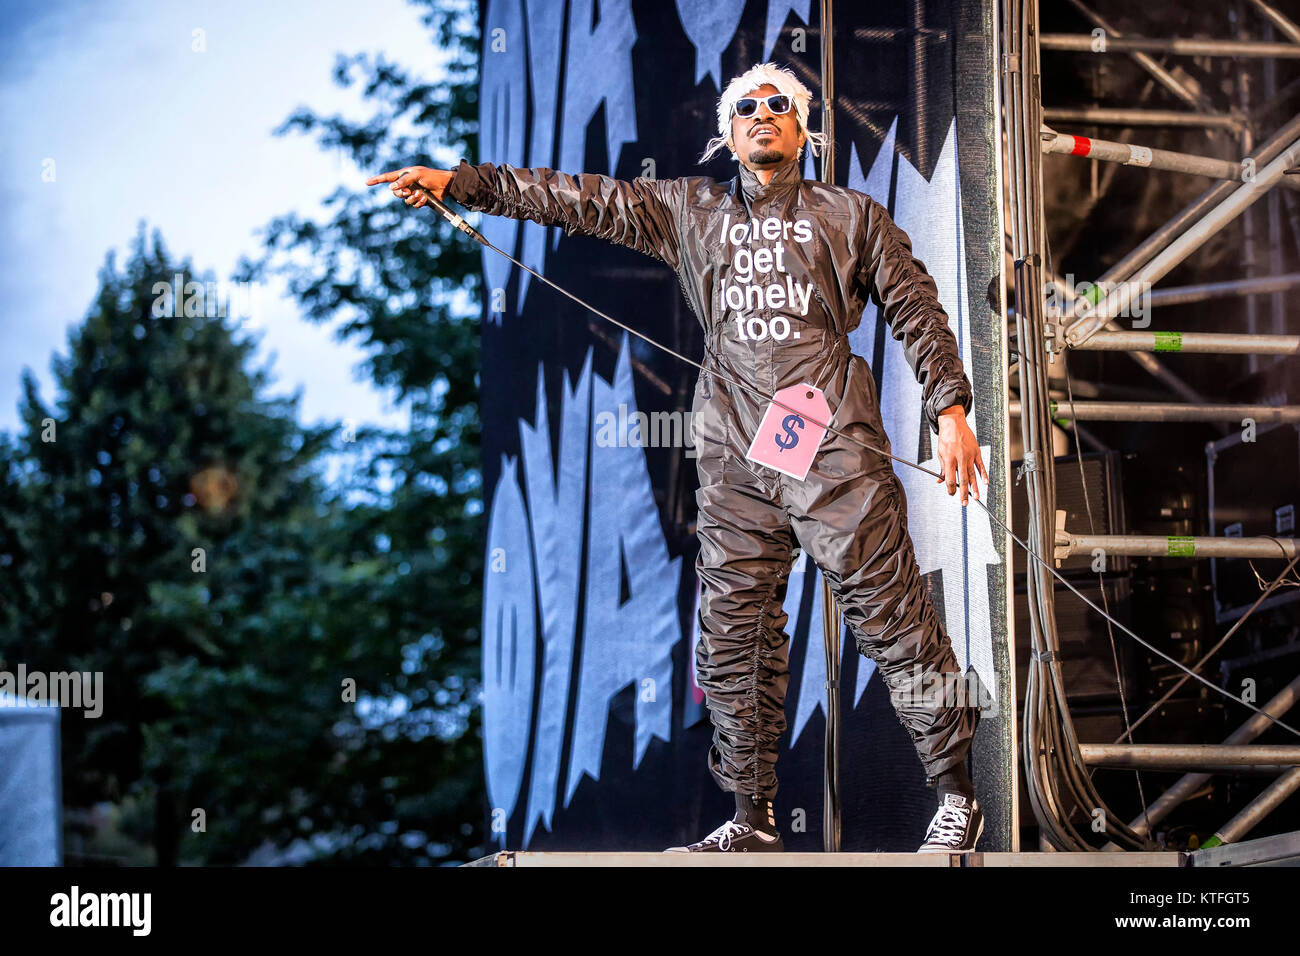 The American rap duo OutKast performs a live concert at the Norwegian music festival Øyafestivalen 2014. The Atlanta-based group consists of the two rappers André 3000 (pictured) and Big Boi. Norway, 07.08.2014. Stock Photo